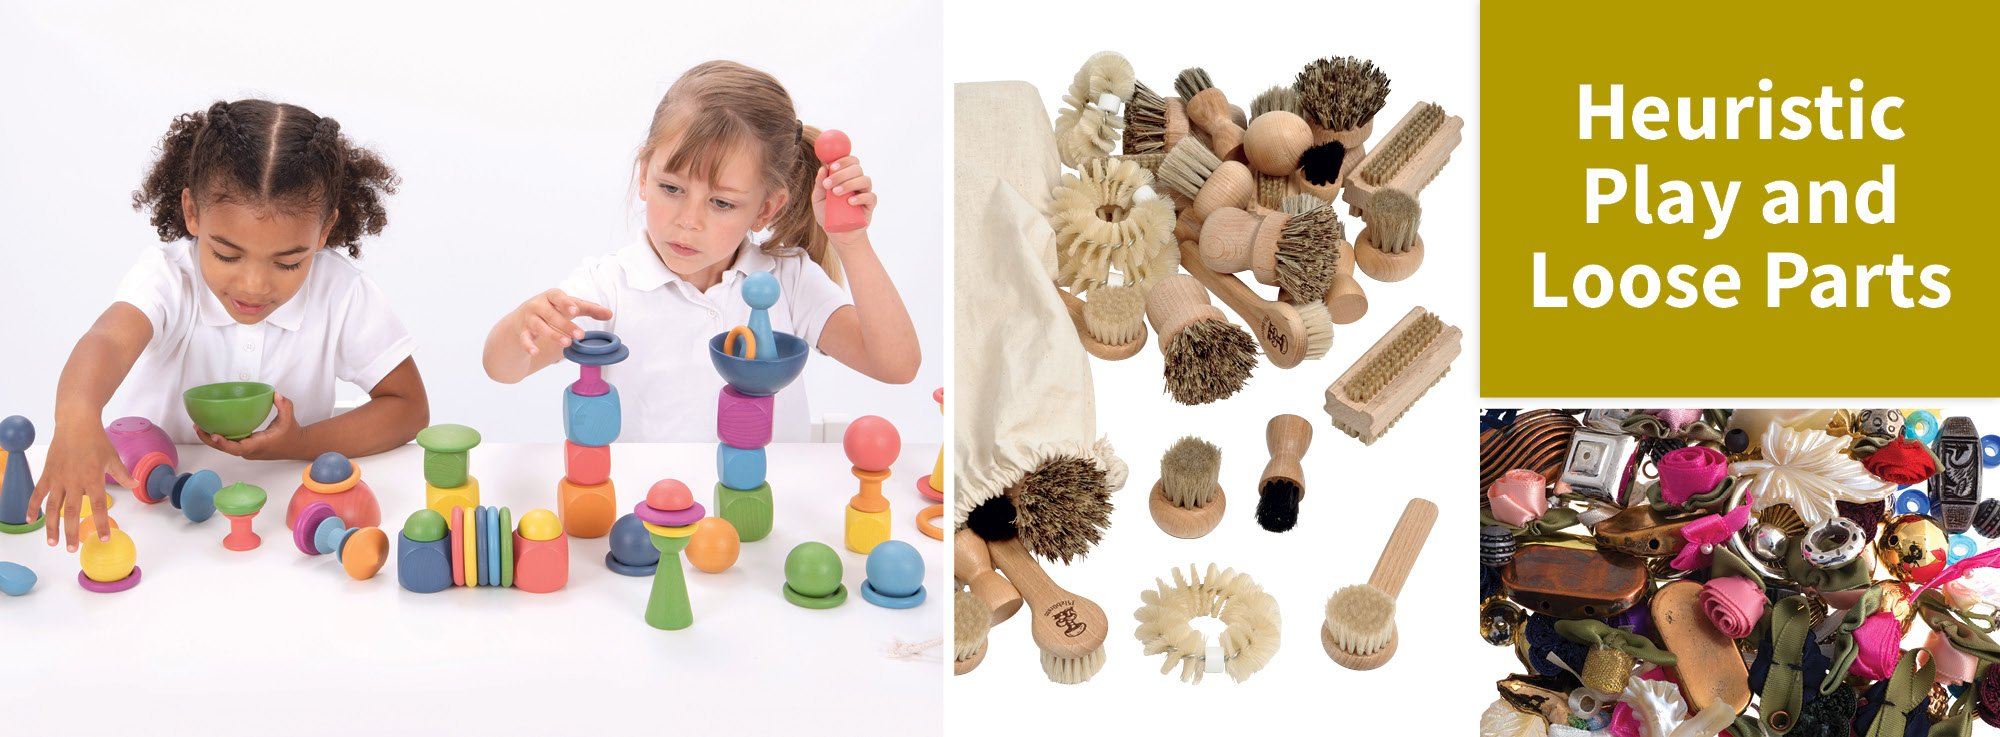 Heuristic Play and Loose Parts